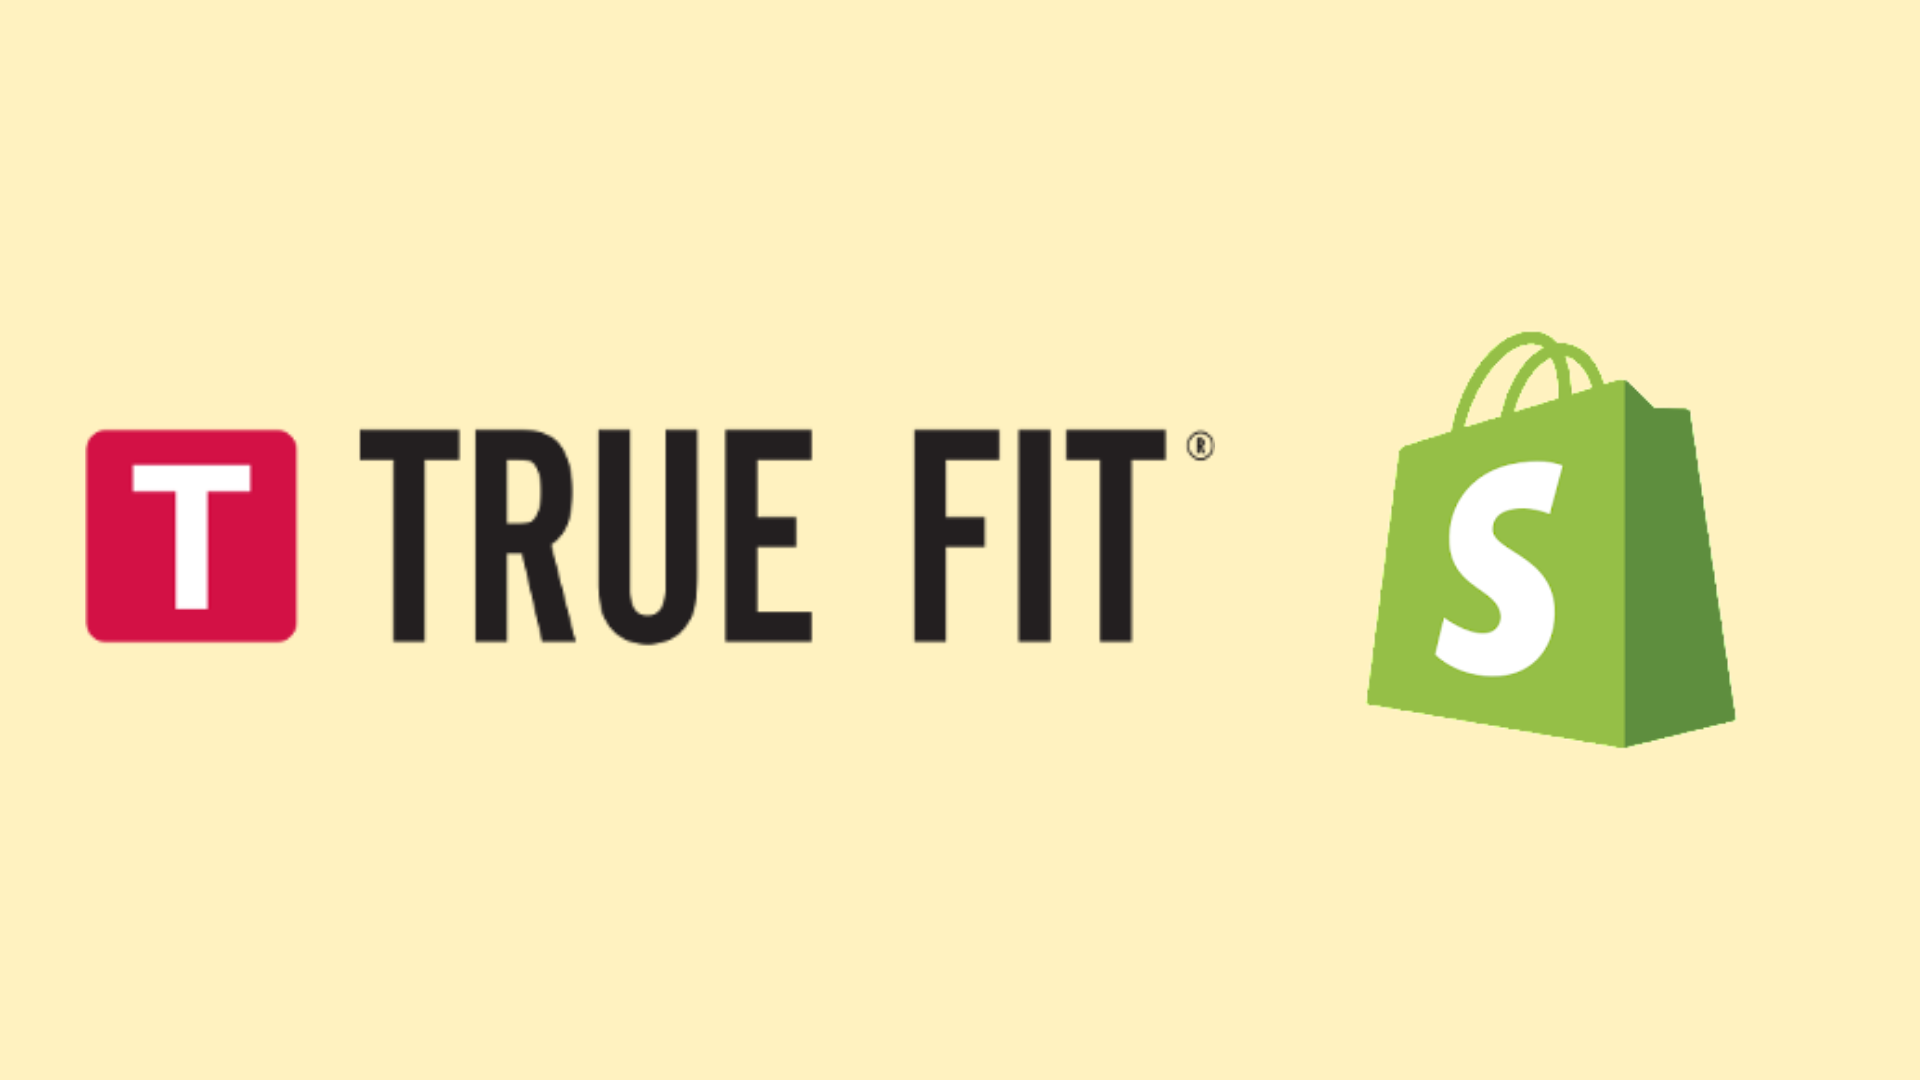 true fit and shopify logos, hinting at their latest collaboration in artificial intelligence integration